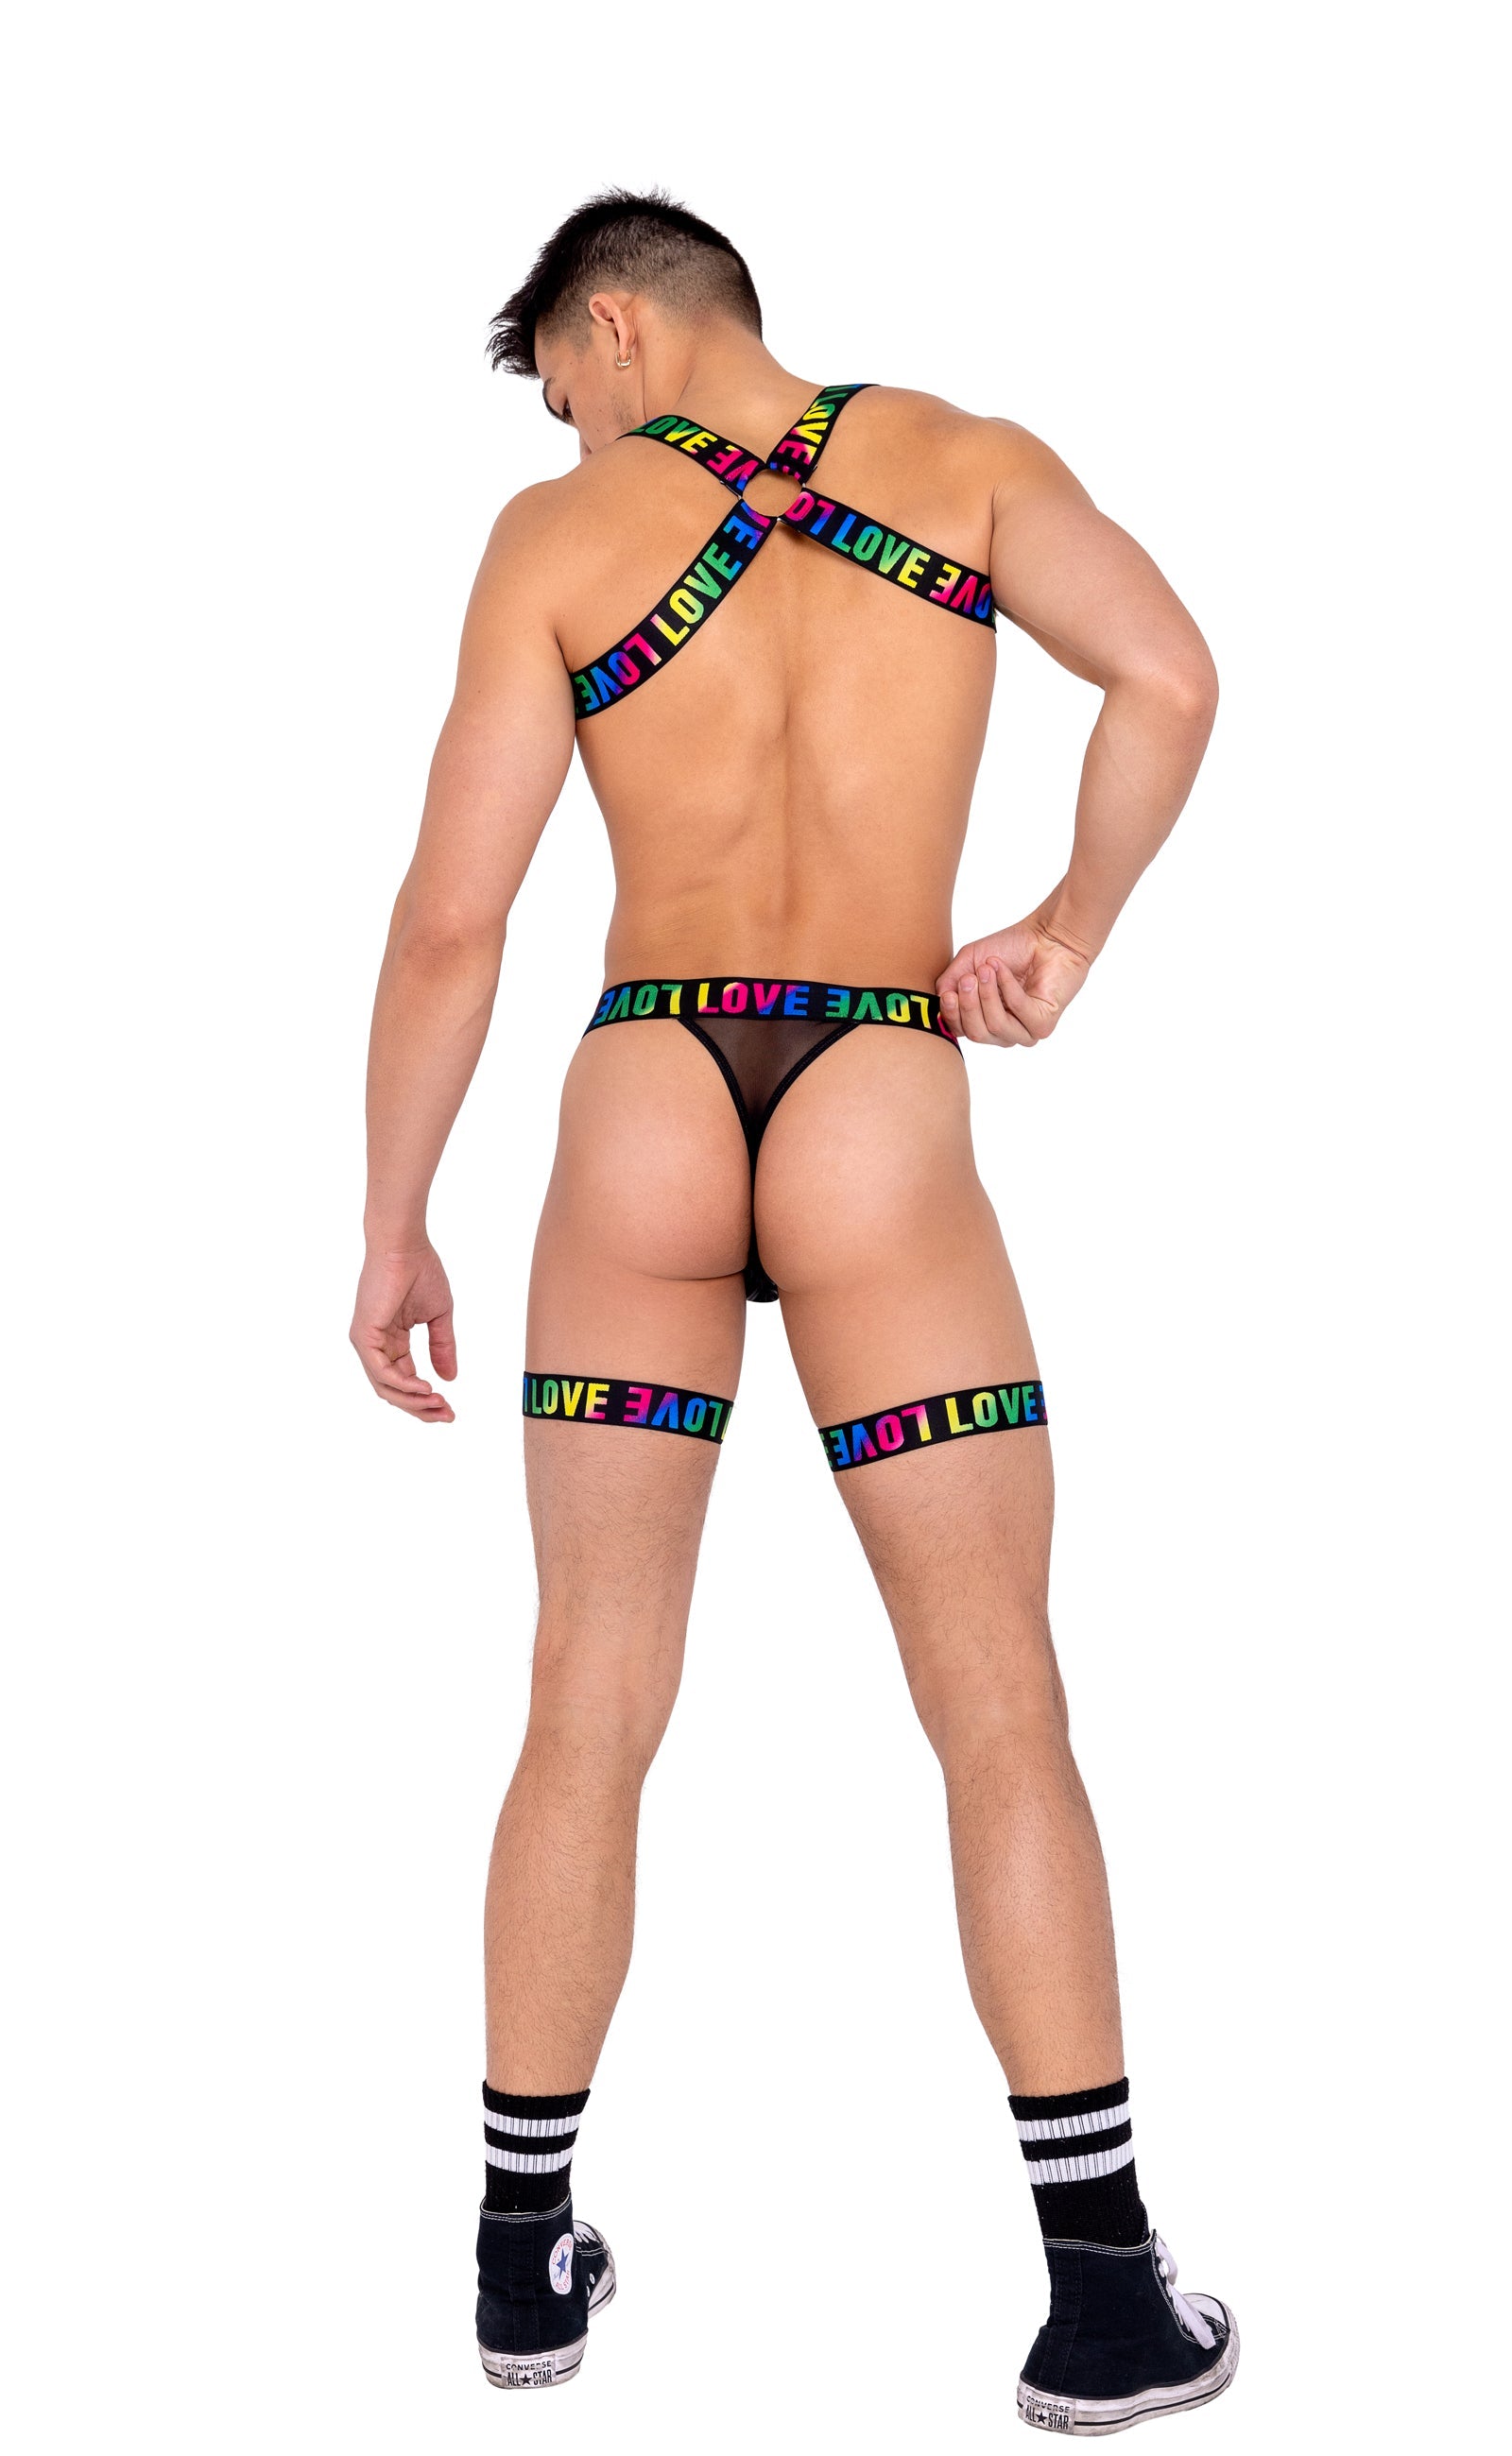 6157 - Men’s Pride Harness with Chain & Ring Detail